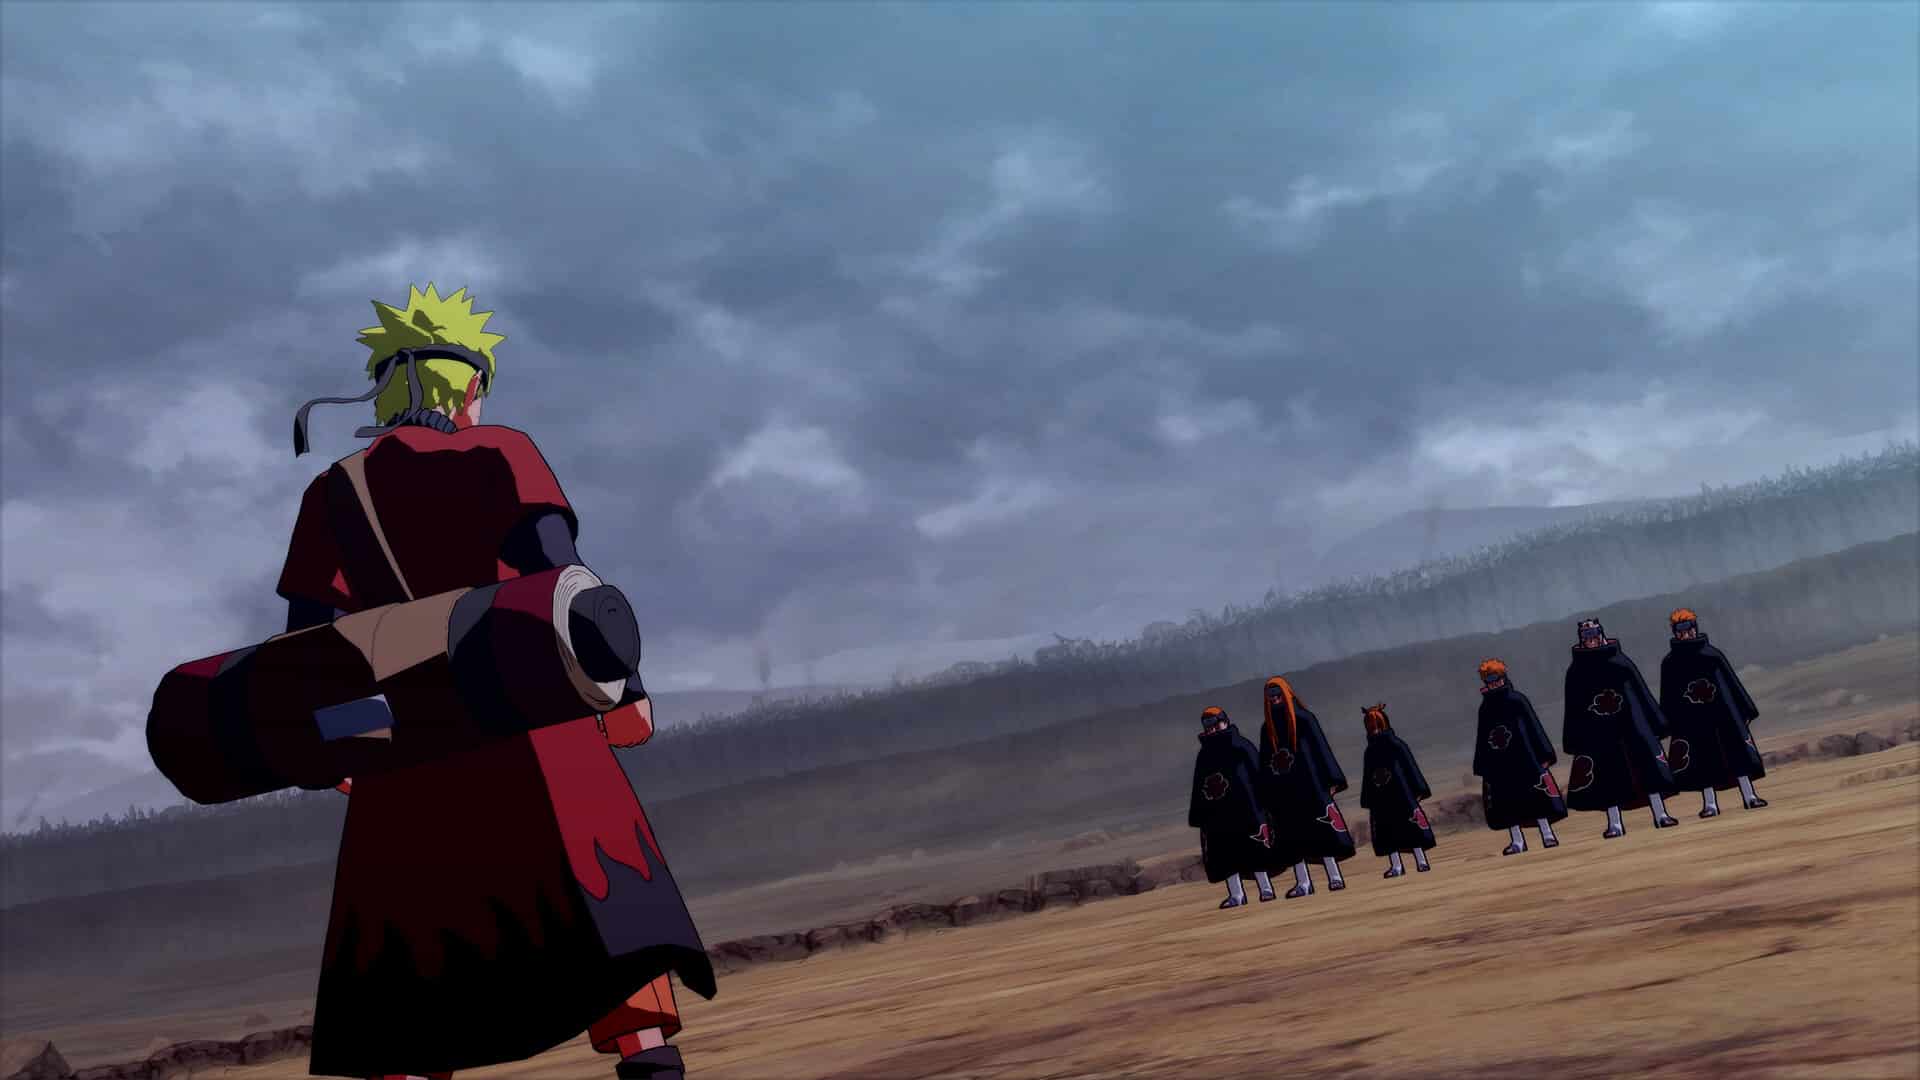 Naruto X Boruto Ultimate Ninja Storm Connections Collector's Editions  Revealed - GameSpot